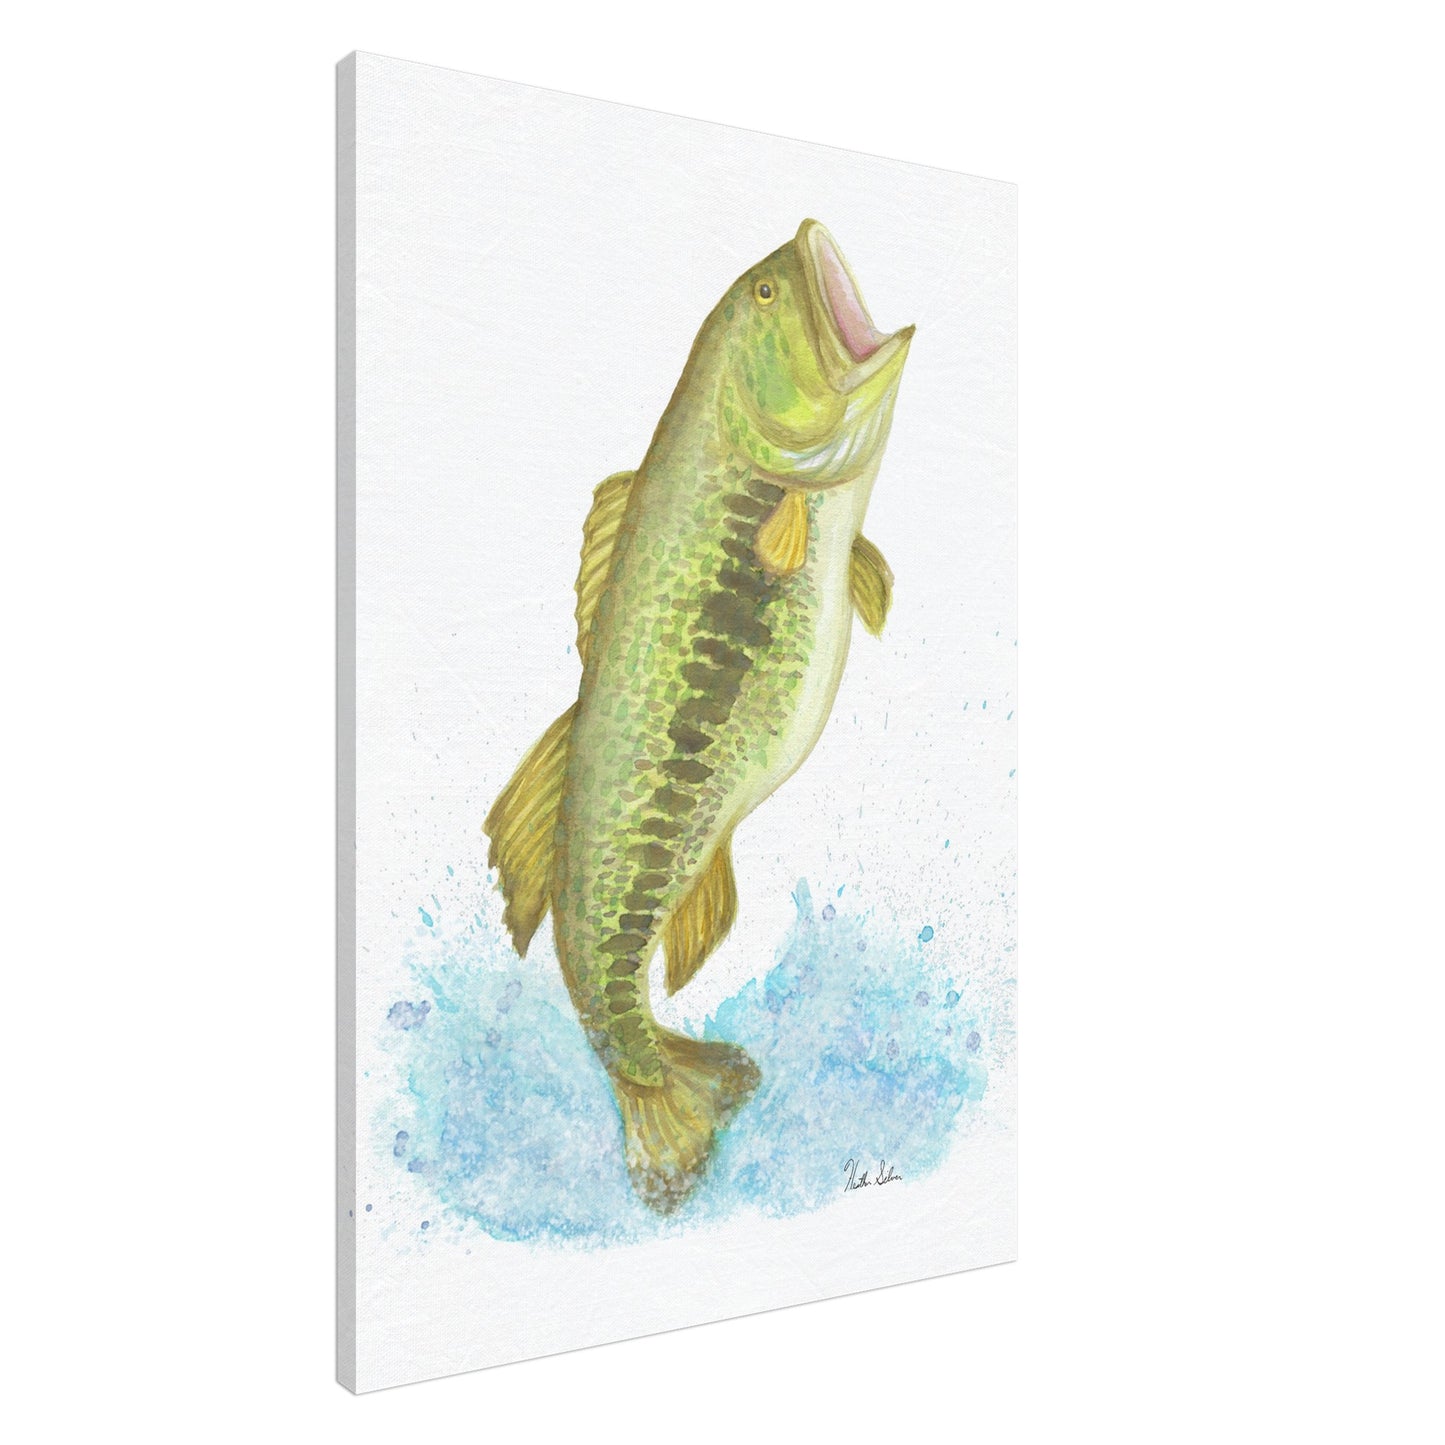 28 by 40 inch slim canvas wall art print featuring a watercolor painting of a largemouth bass leaping from the water. Canvas shown from an angle.